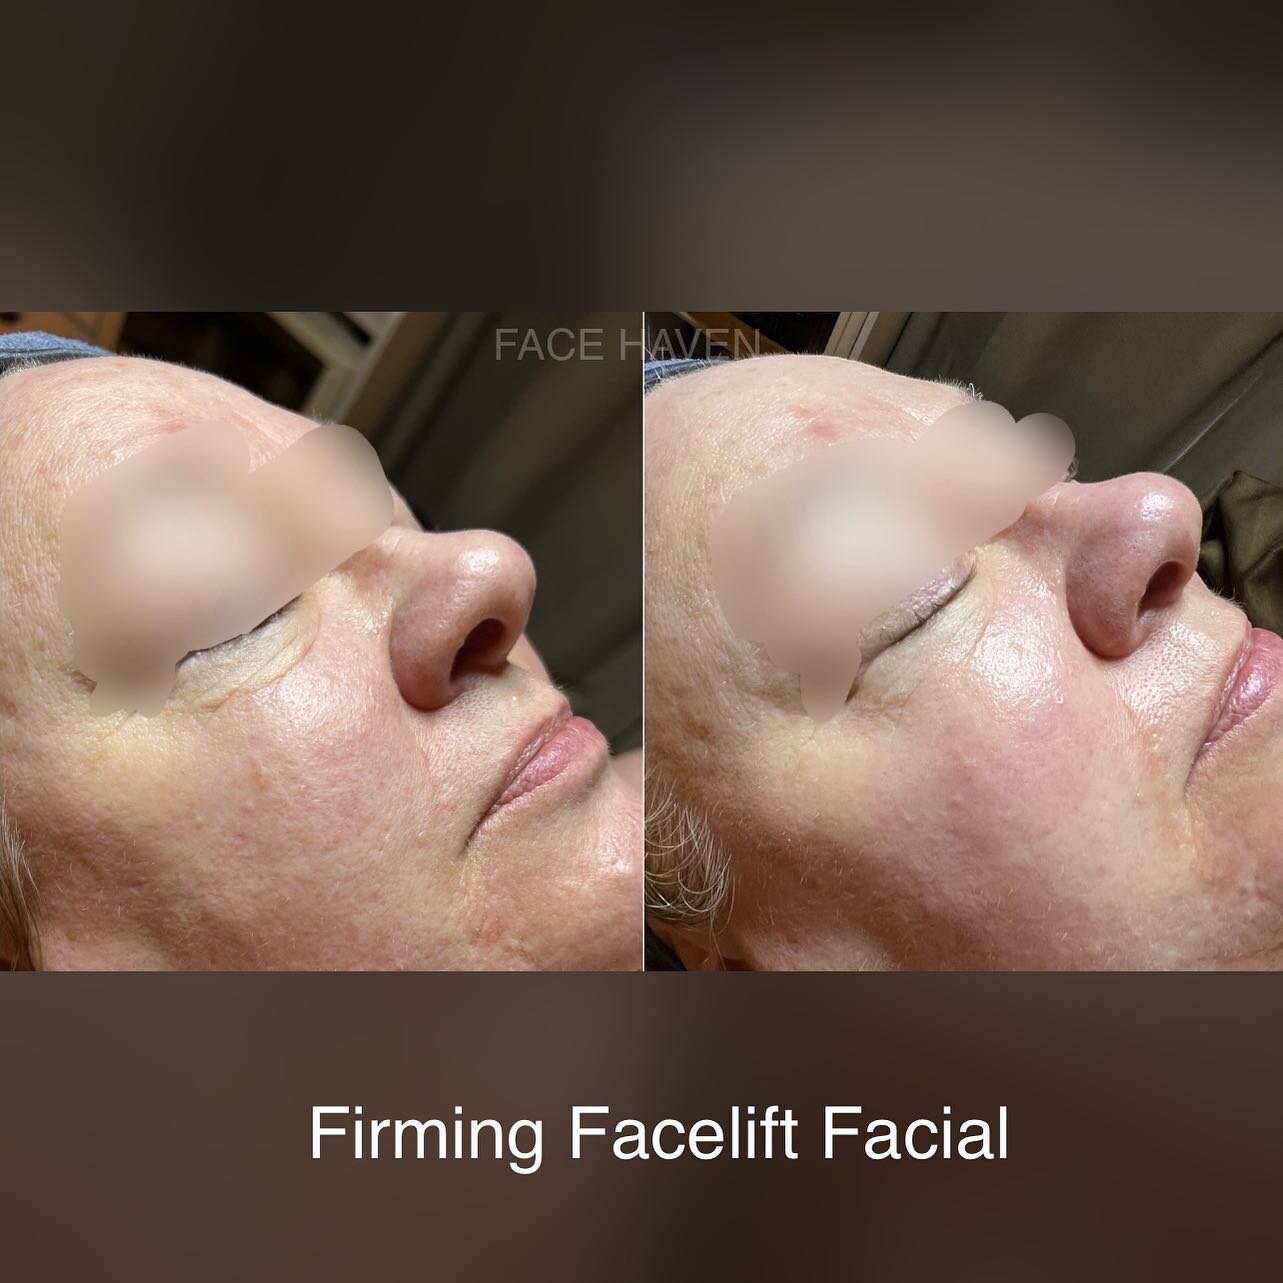 V-lifting mask is a popular treatment in South Korea that dramatically lift, tighten, and define facial contours, while brightening skin for an immediate glow. Wrinkle-erasing acetyl hexapeptide (known as botox effect), hydrolyzed collagen, copper pe